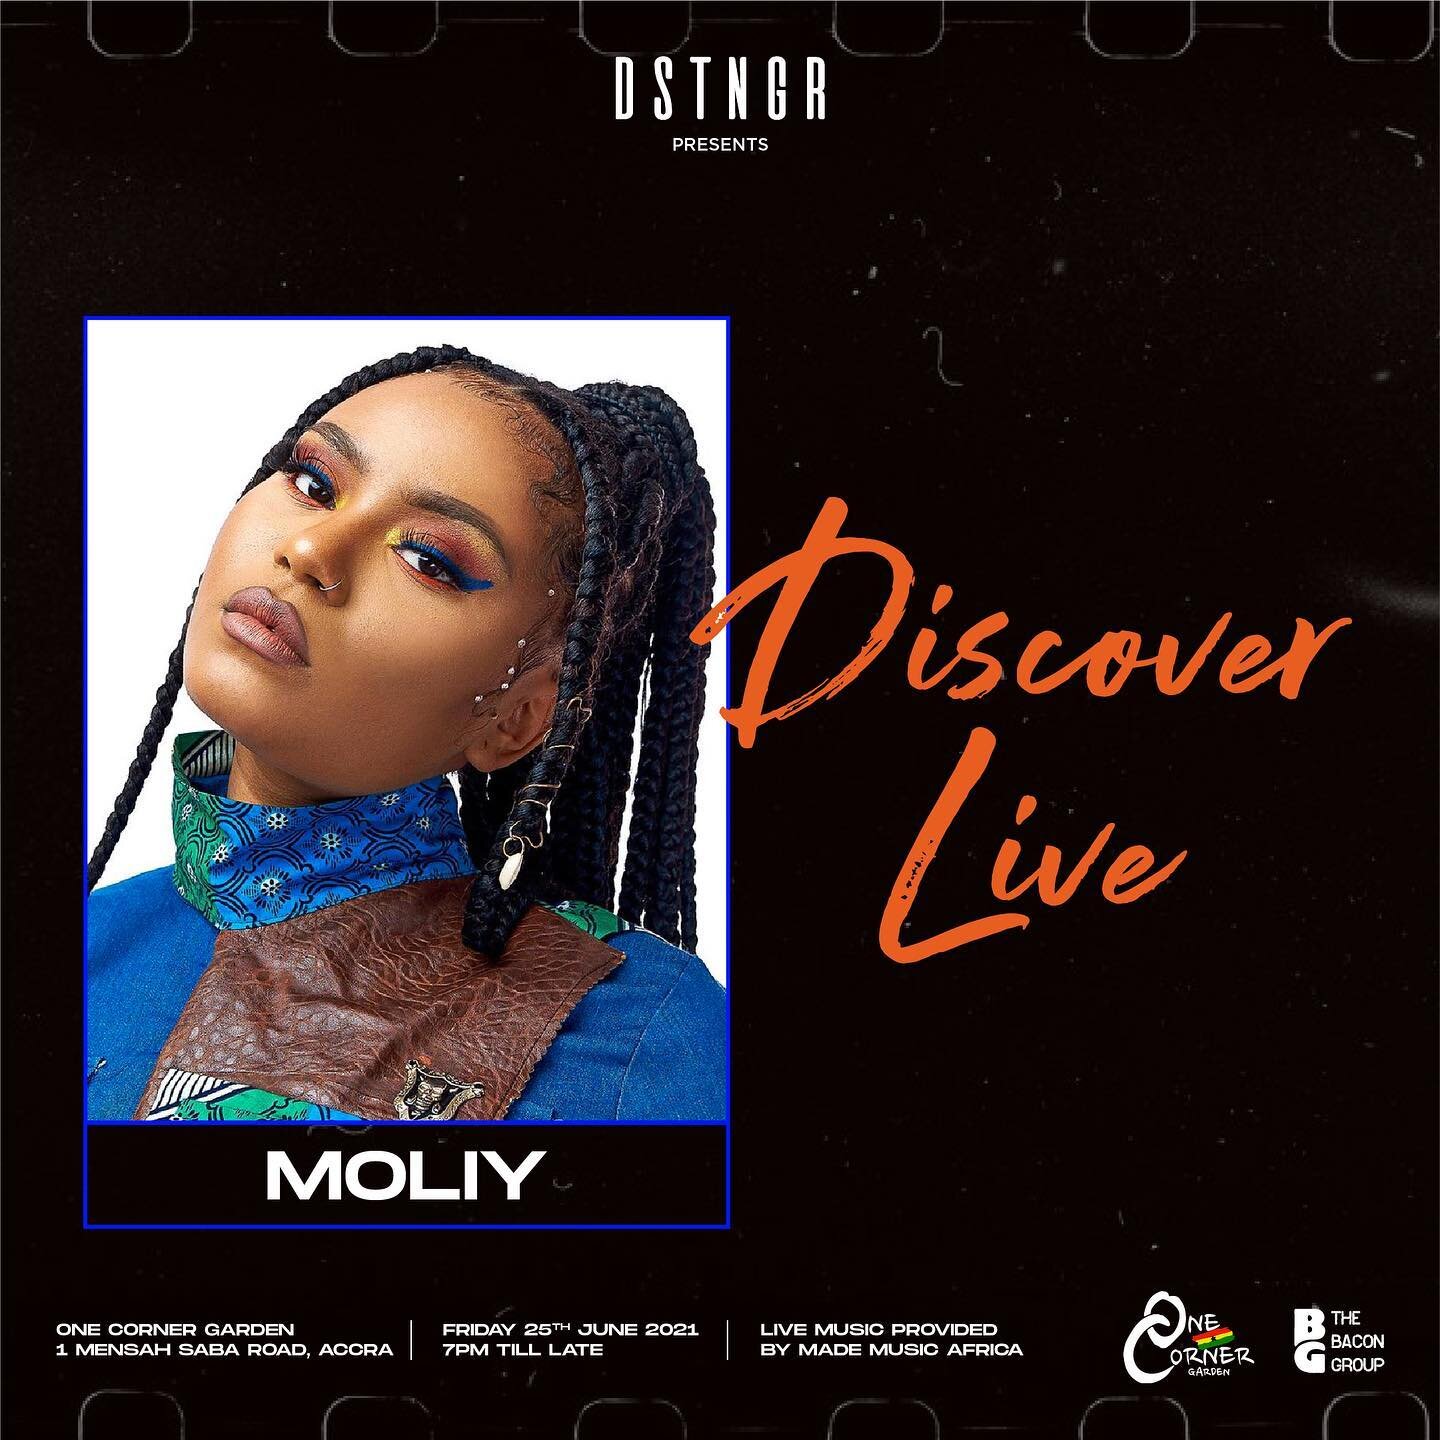 This FRIDAY! Afro-fusion singer-songwriter @moliymusic will grace the stage as our headline act for &lsquo;DISCOVER LIVE&rsquo; at @onecornergh!

FREE ENTRY! Doors open at 7PM! 

Swipe left to see her limited edition &lsquo;DISCOVER LIVE&rsquo; tee. 